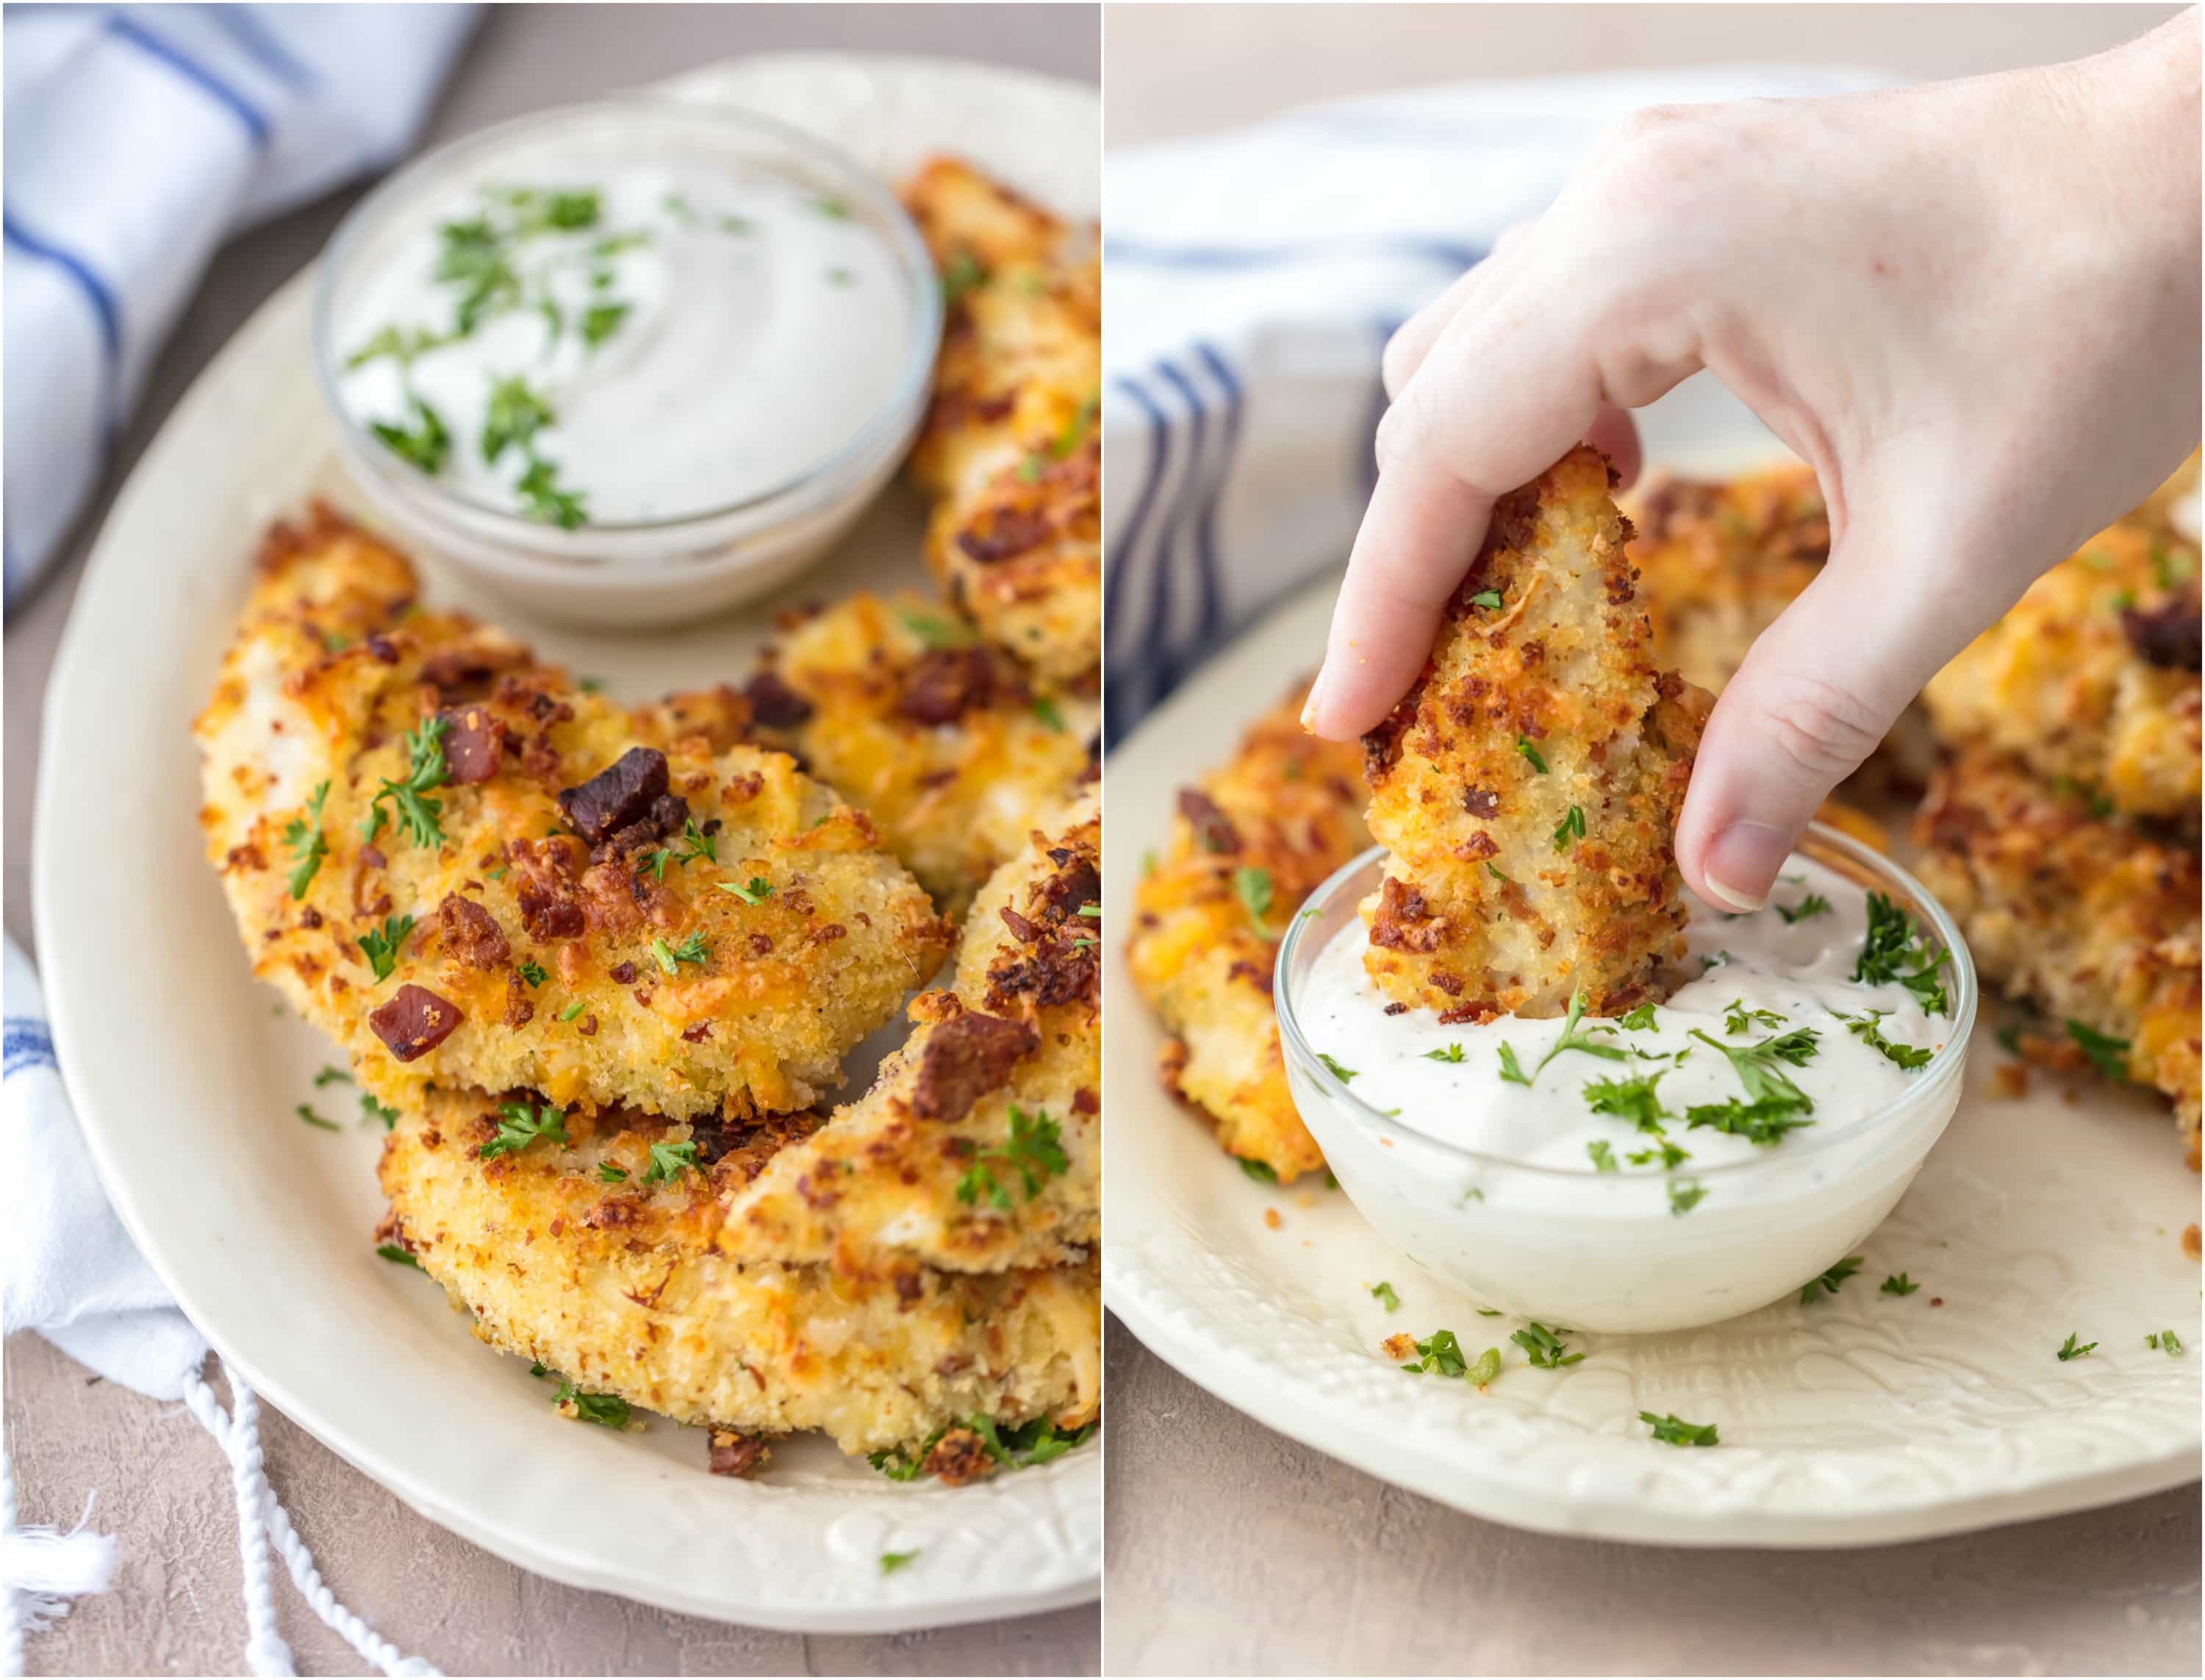 CHEDDAR BACON RANCH CHICKEN TENDERS! These Baked Chicken Strips are SO CRISPY, flavorful, and delicious. Coated in ranch, cheese, and bacon, and baked to perfection. Dip in extra ranch for the perfect snack!